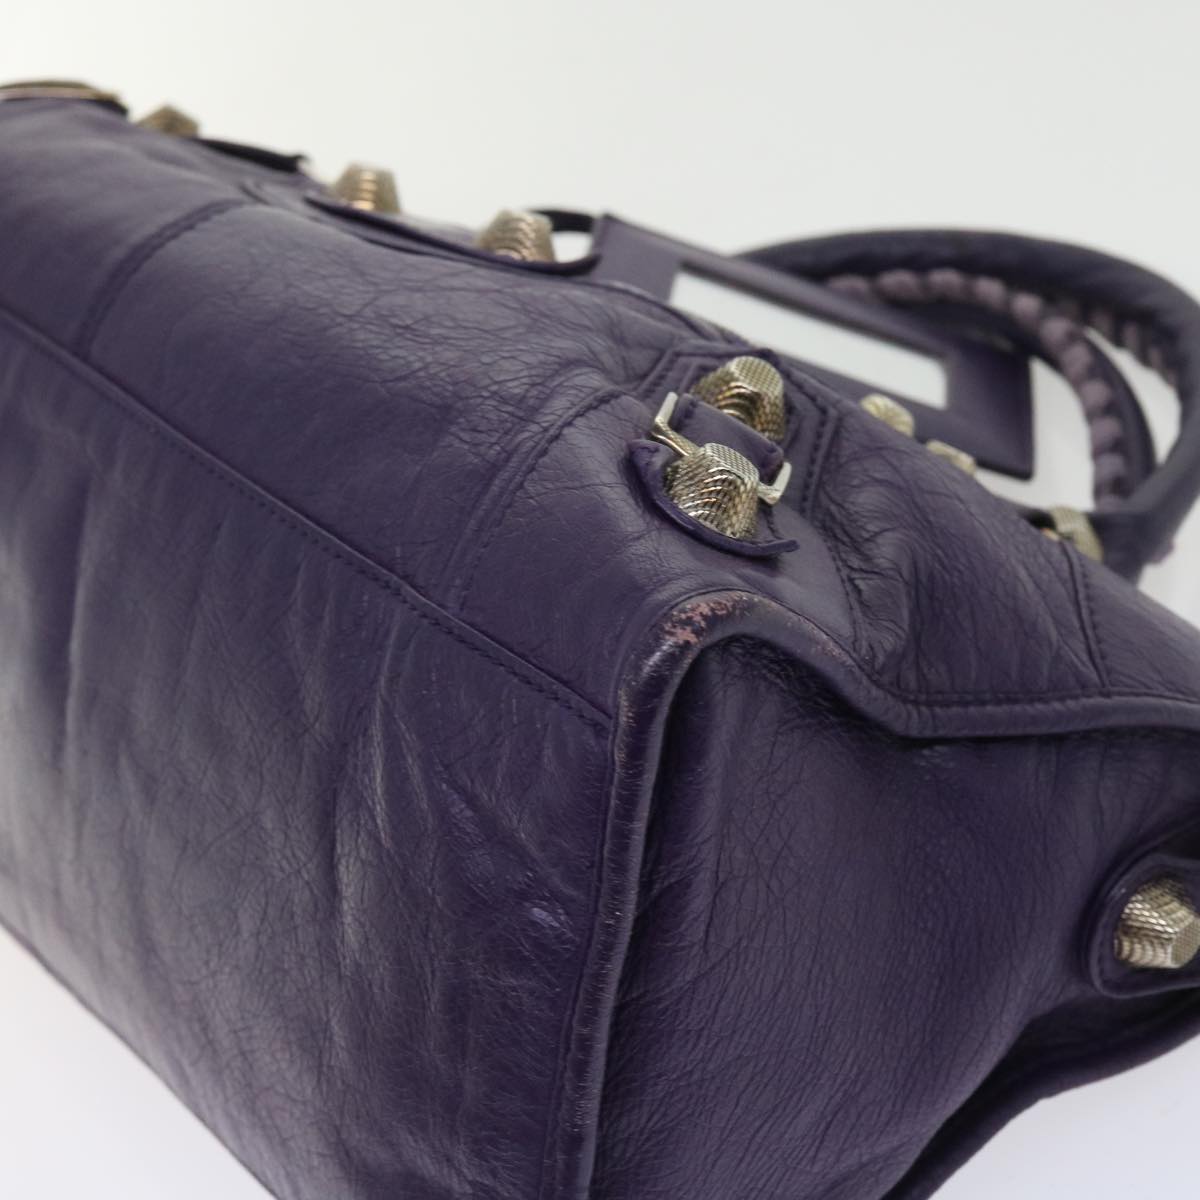 BALENCIAGA Part Time Giant Hand Bag Leather 2way Purple Auth 56666